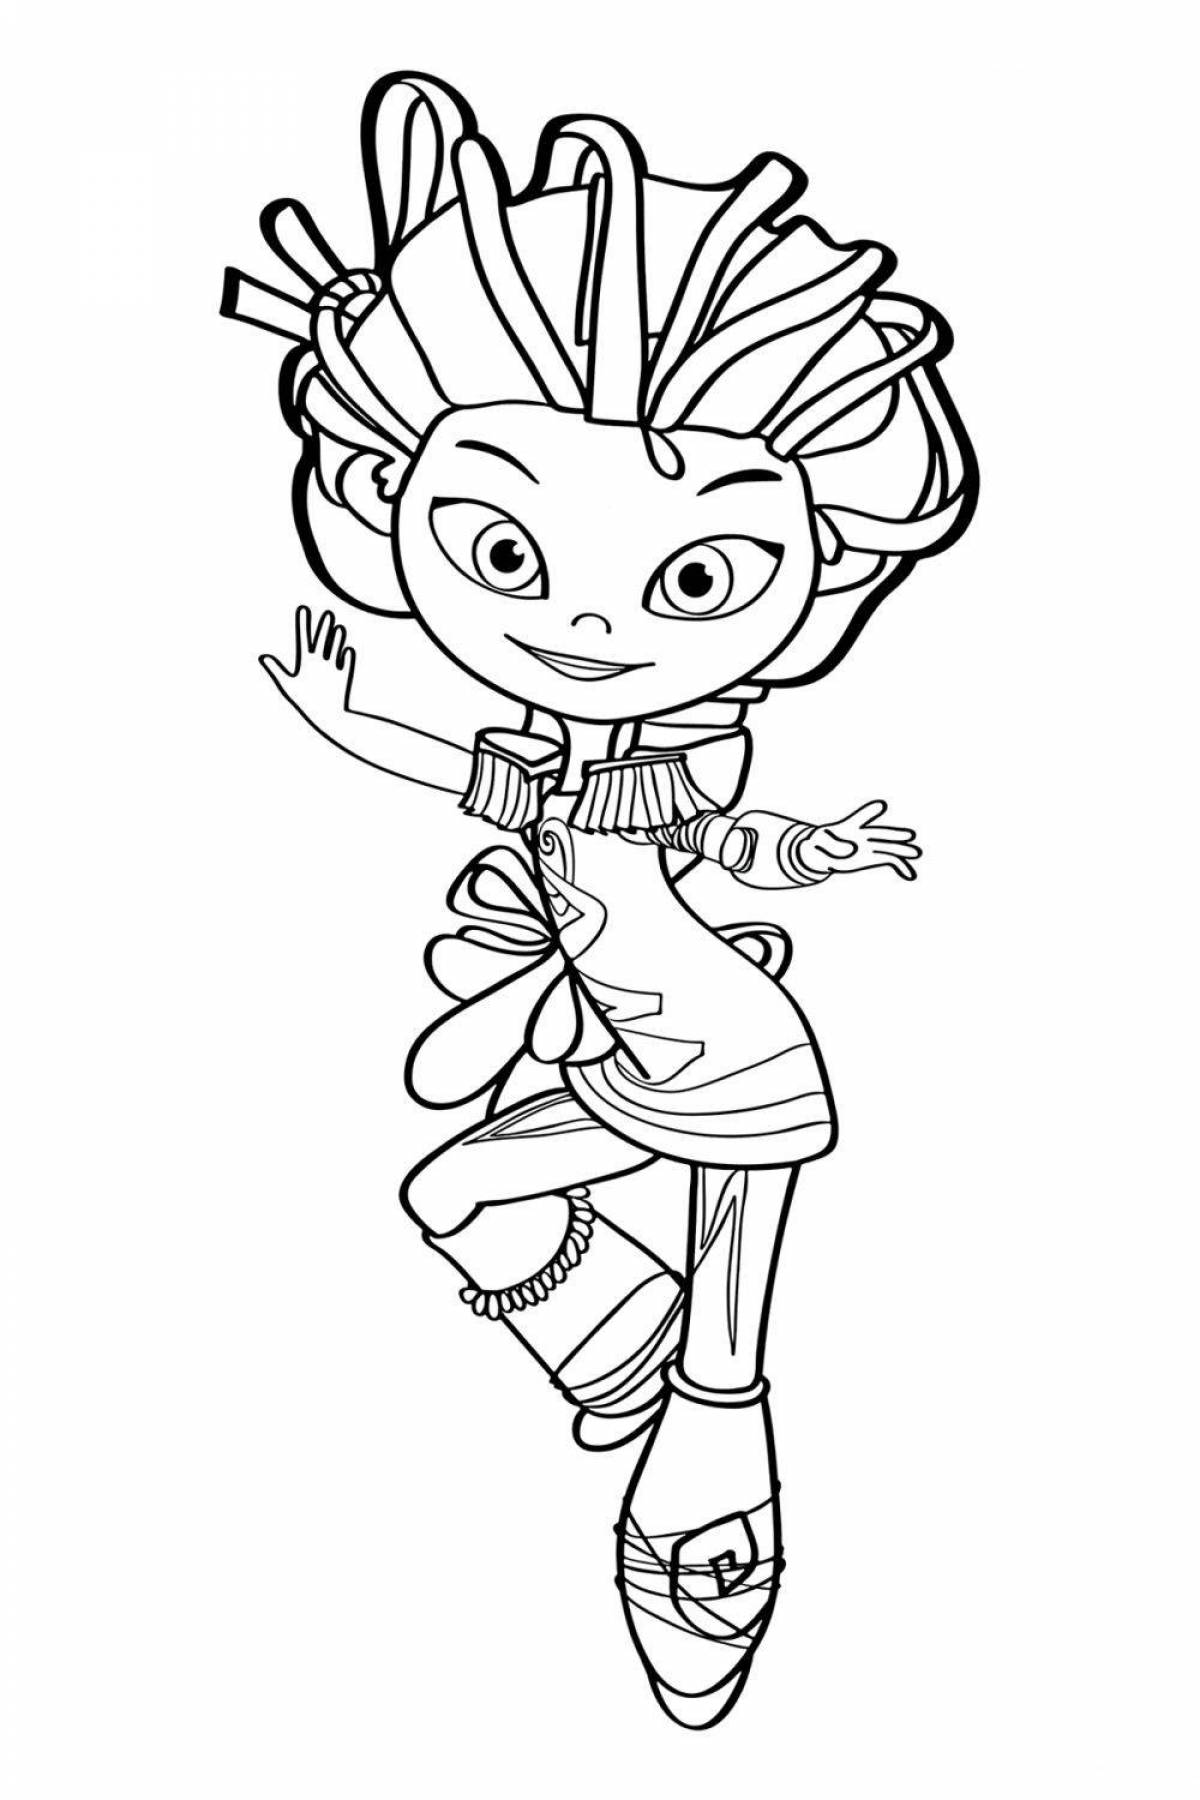 Blissful patrol is preparing coloring pages